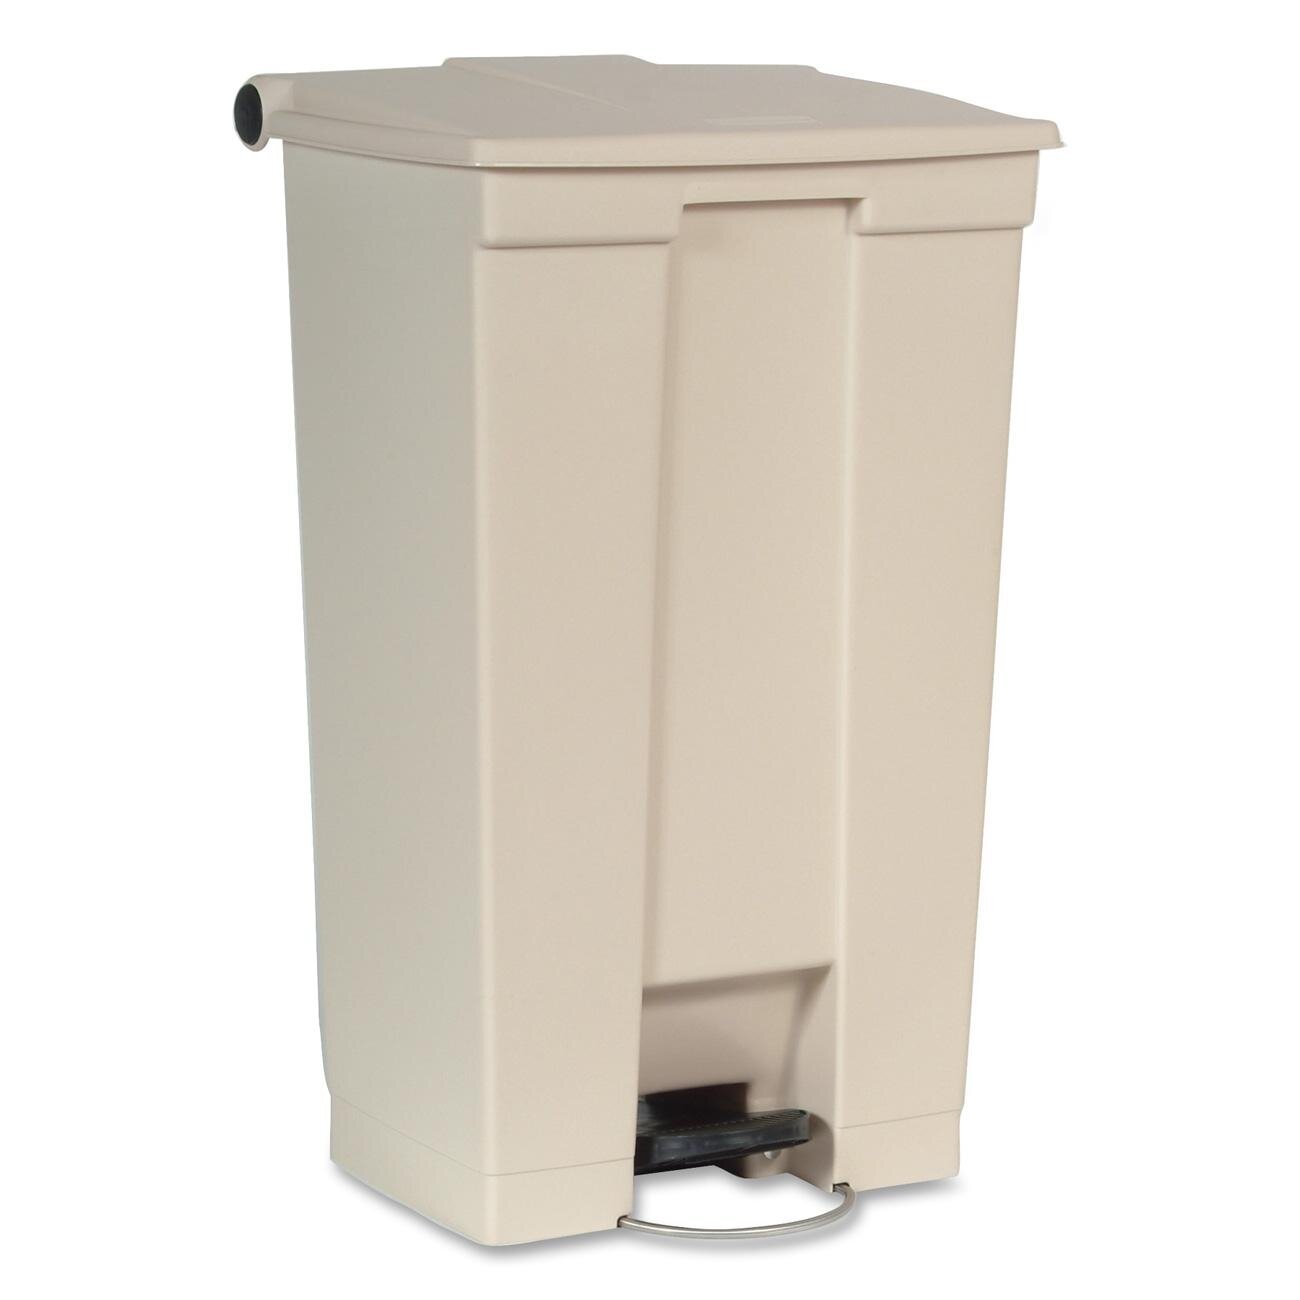 Rubbermaid Commercial Products 22-Gallons Brown Plastic Commercial